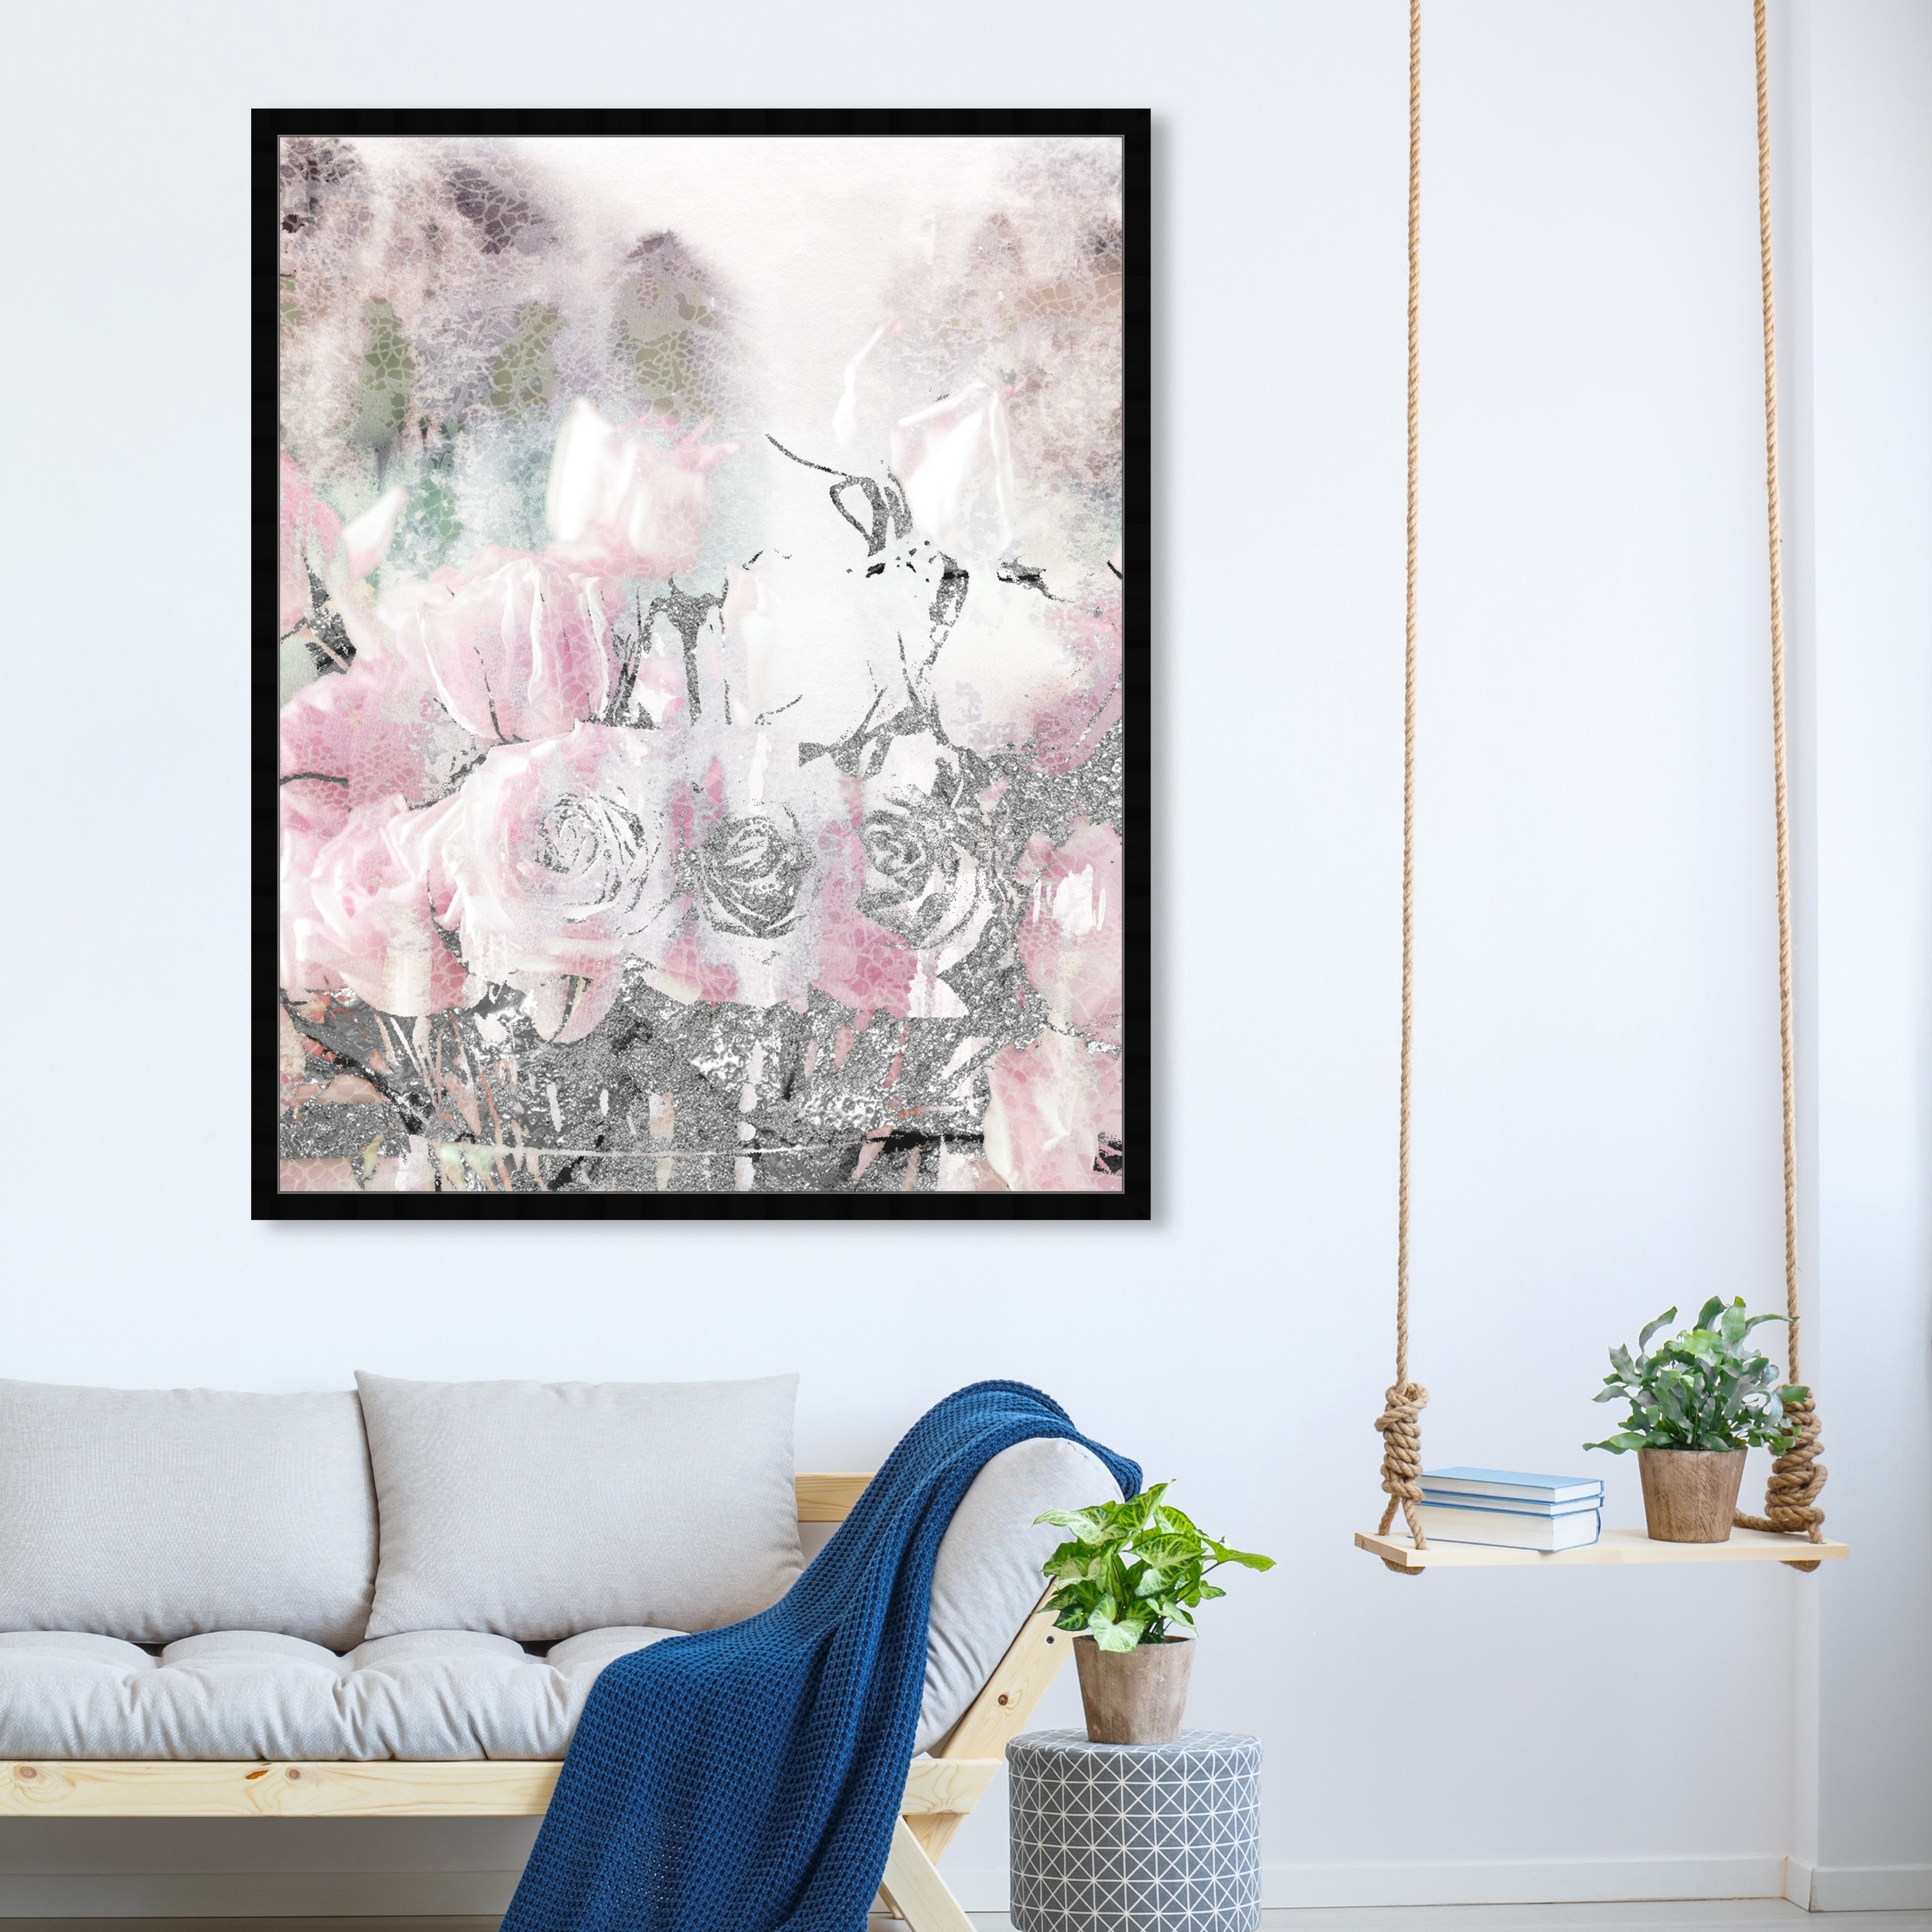 Oliver Gal 'Romance Lace and Roses' Floral and Botanical Framed Wall Art Prints Florals - Pink, Gray